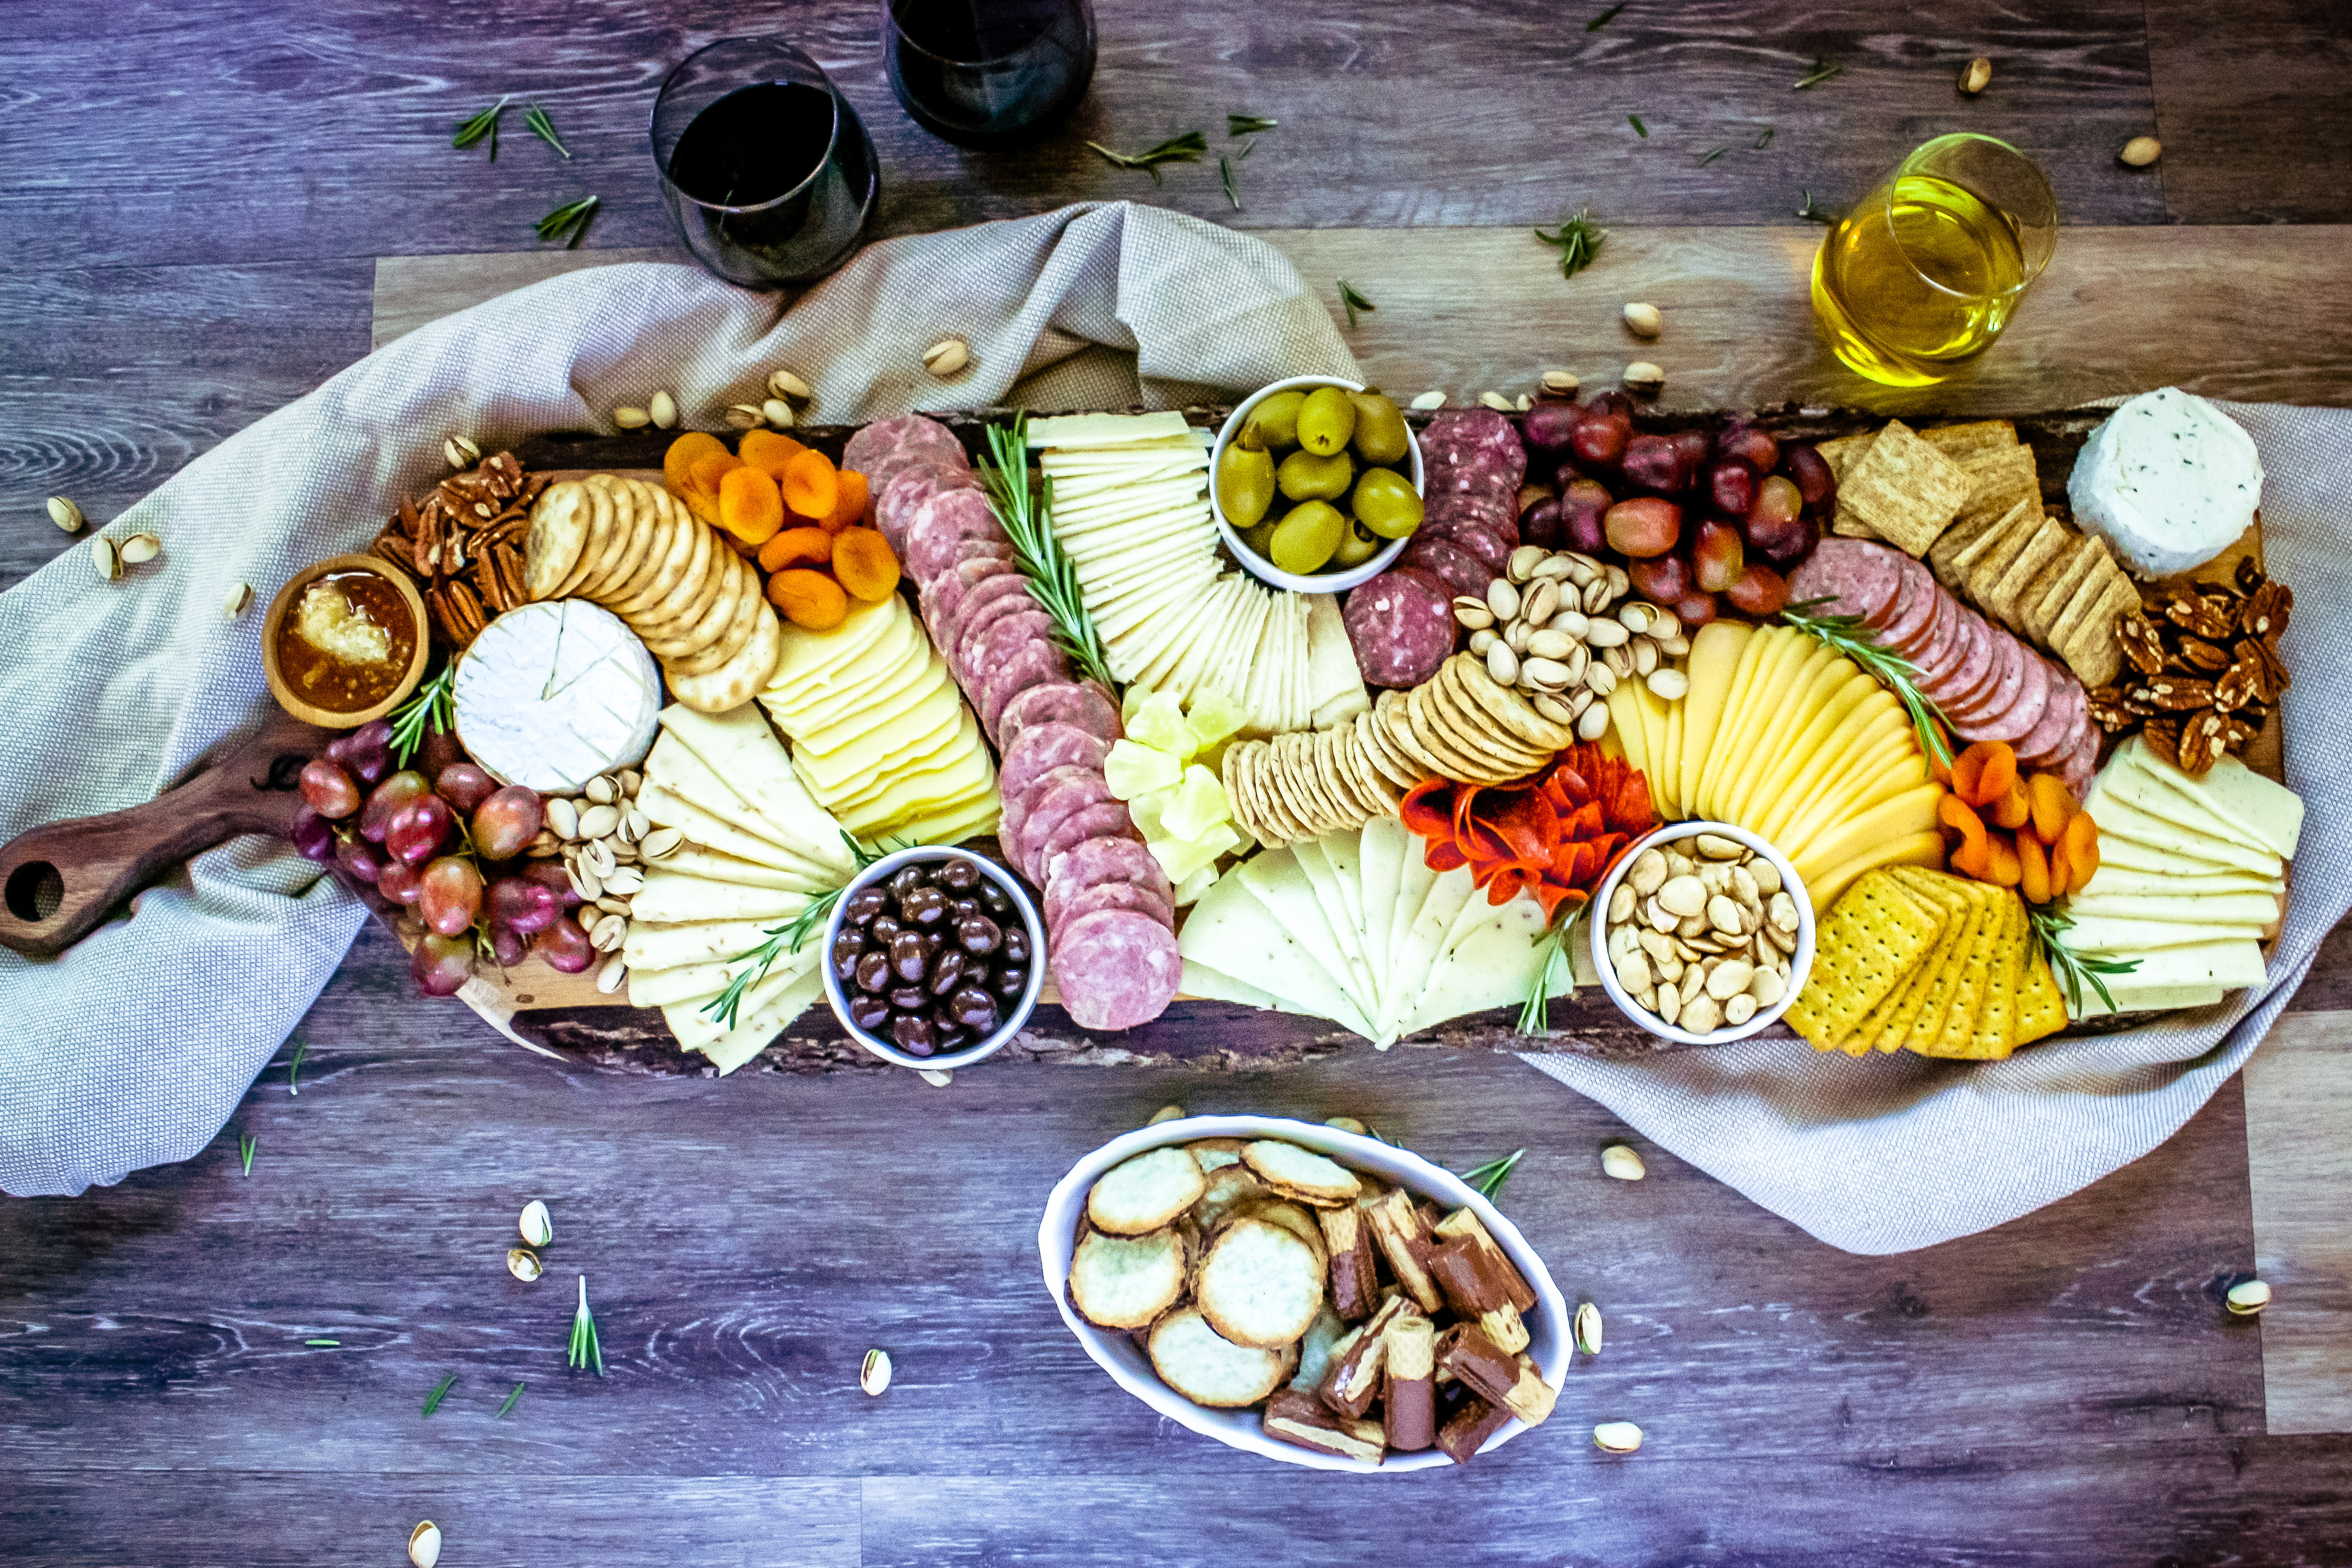 How to Make A Charcuterie Board